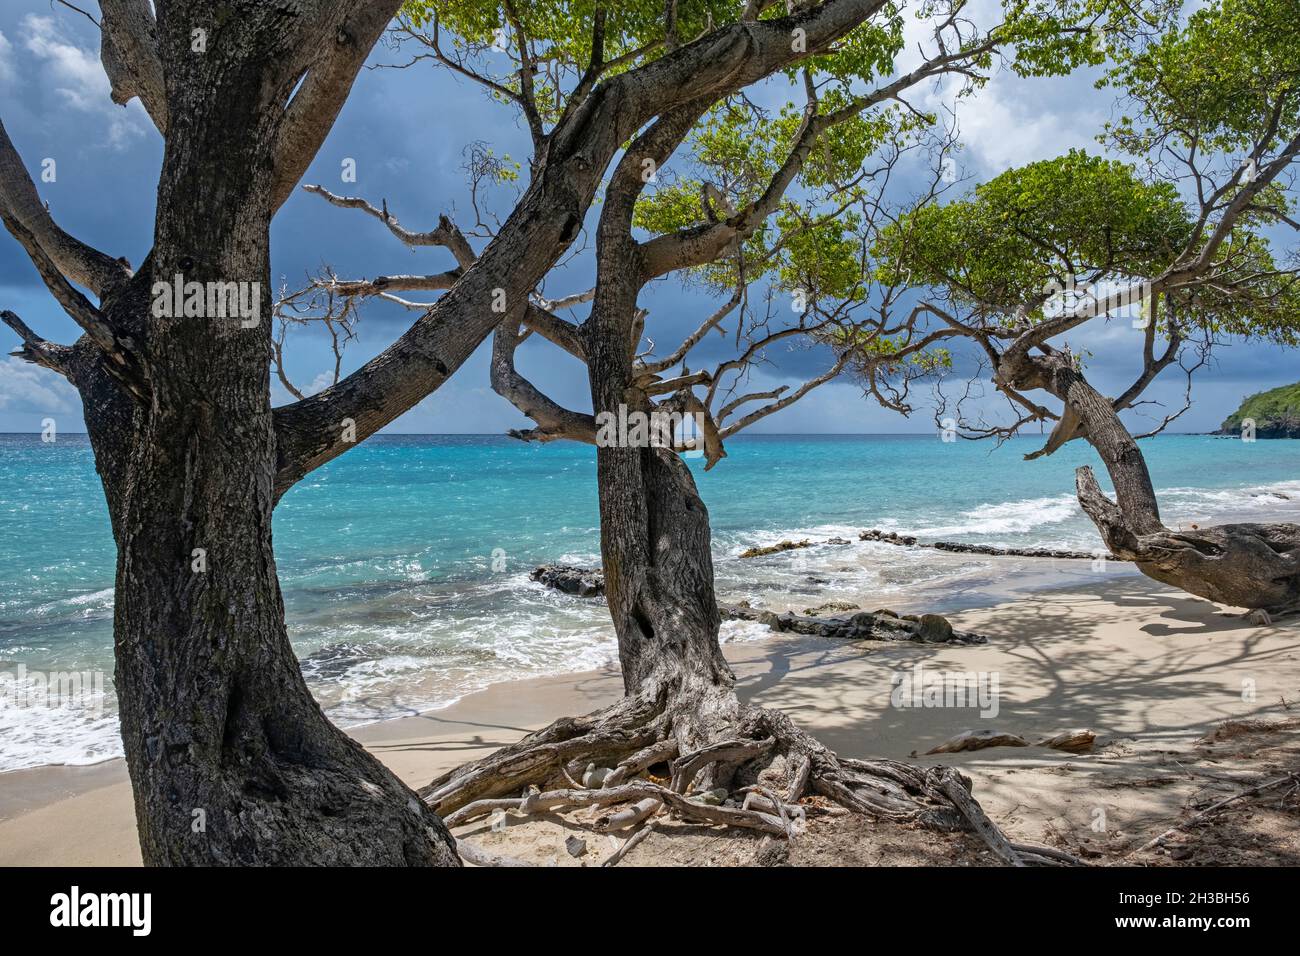 White sandy beach with twisted juniper trees on the island Bequia, part of the nation of Saint Vincent and the Grenadines in the Caribbean Sea Stock Photo